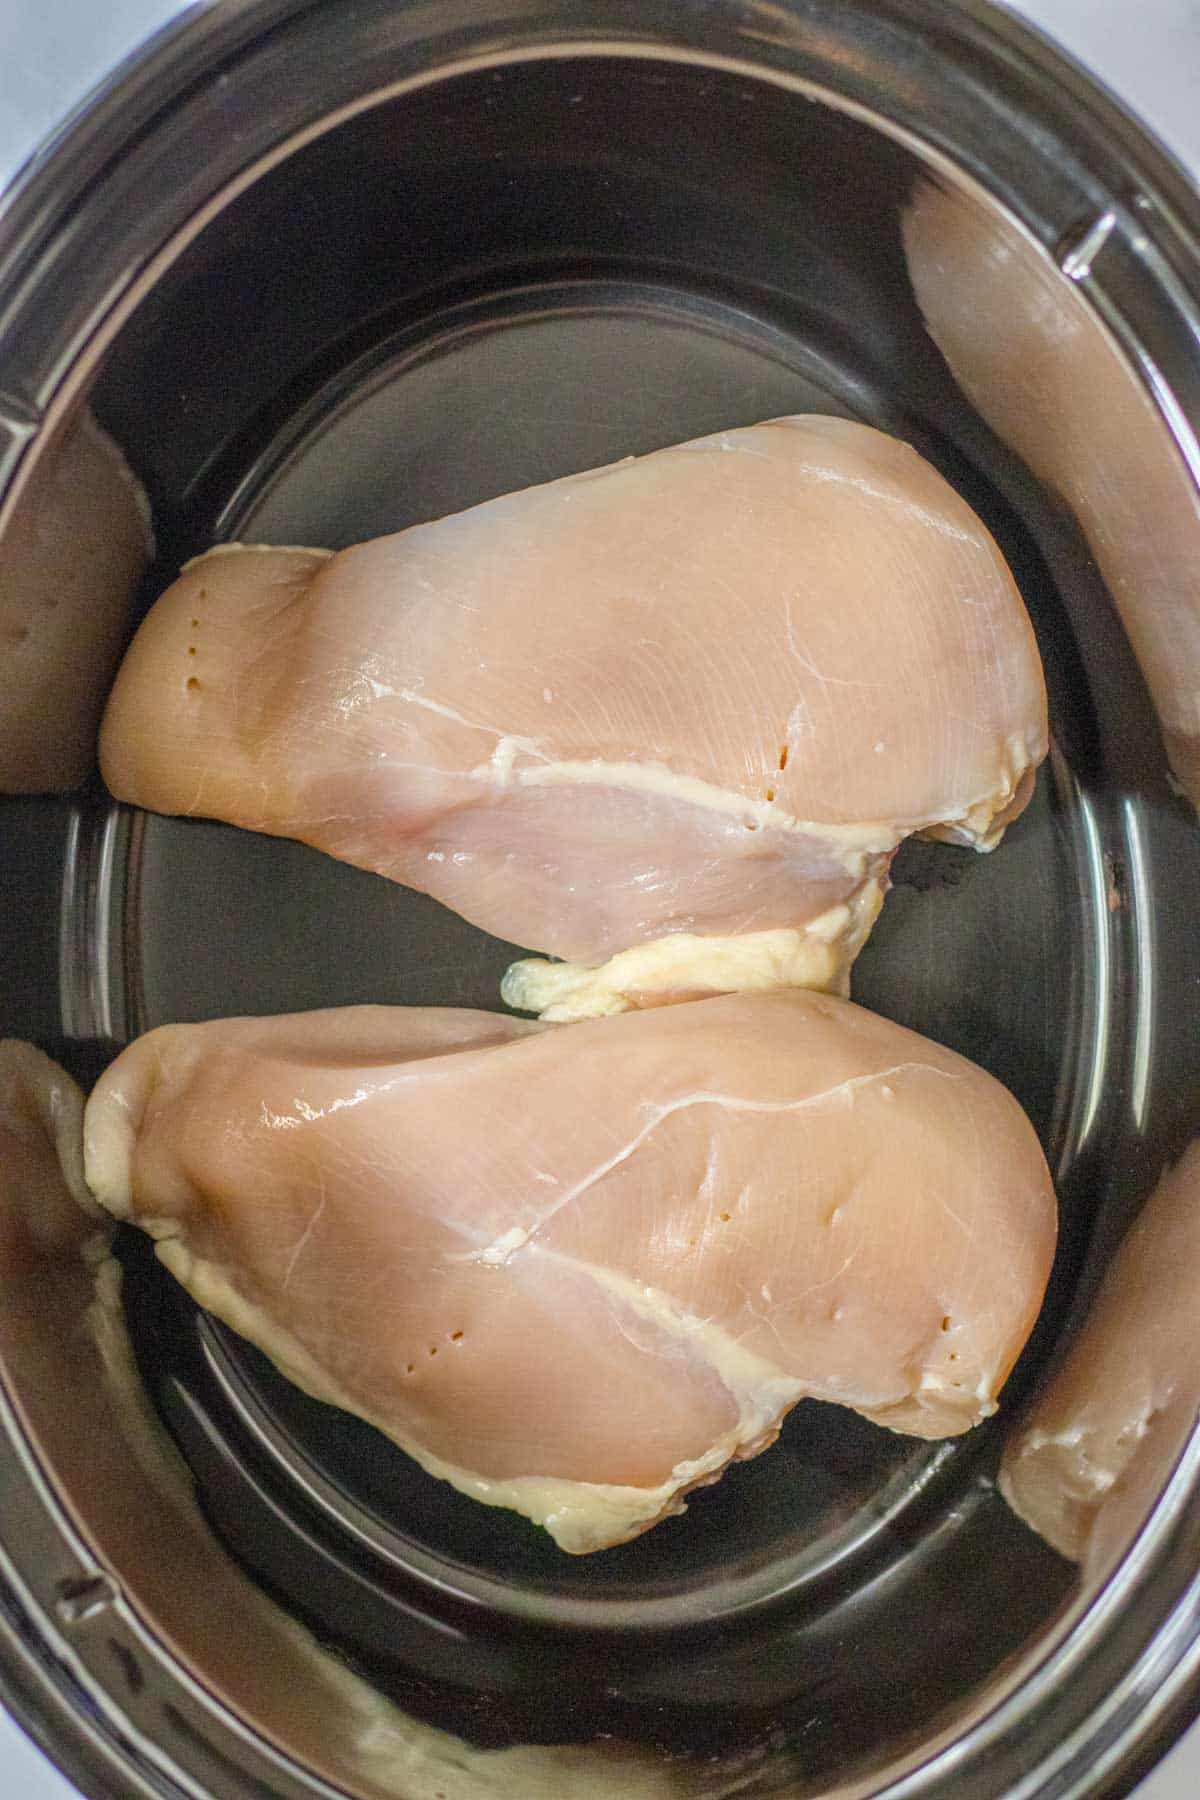 Two chicken breasts in a slow cooker.